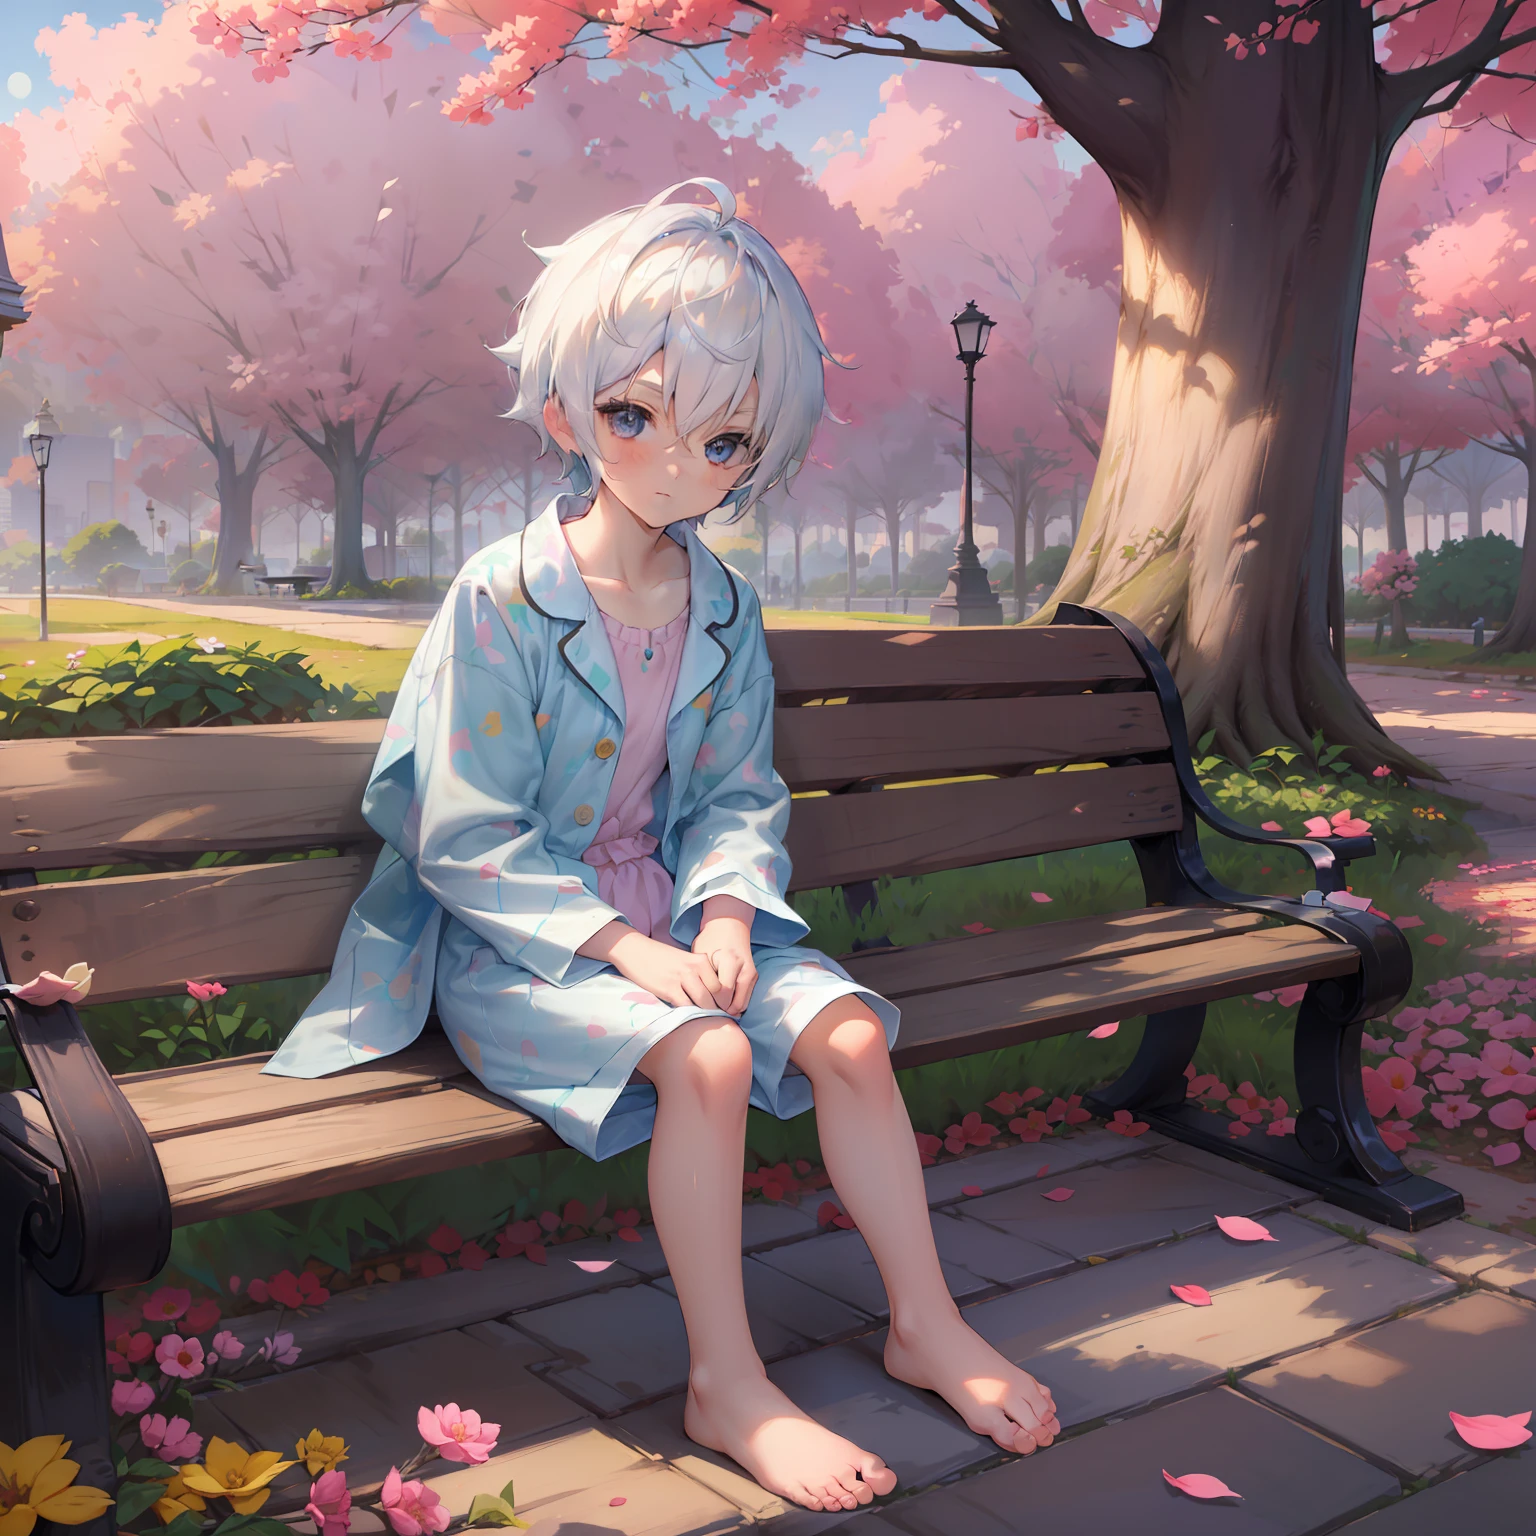 4K), Cute 7 year old little boy with white hair and barefoot and romper pajamas, He sits on a bench in the park and shows his feet, und betet, Regentag, Nebel Licht, Impressionismus, 2D, (Dornen: 1.1), (toter Baum: 1.1) Focused on the feet,